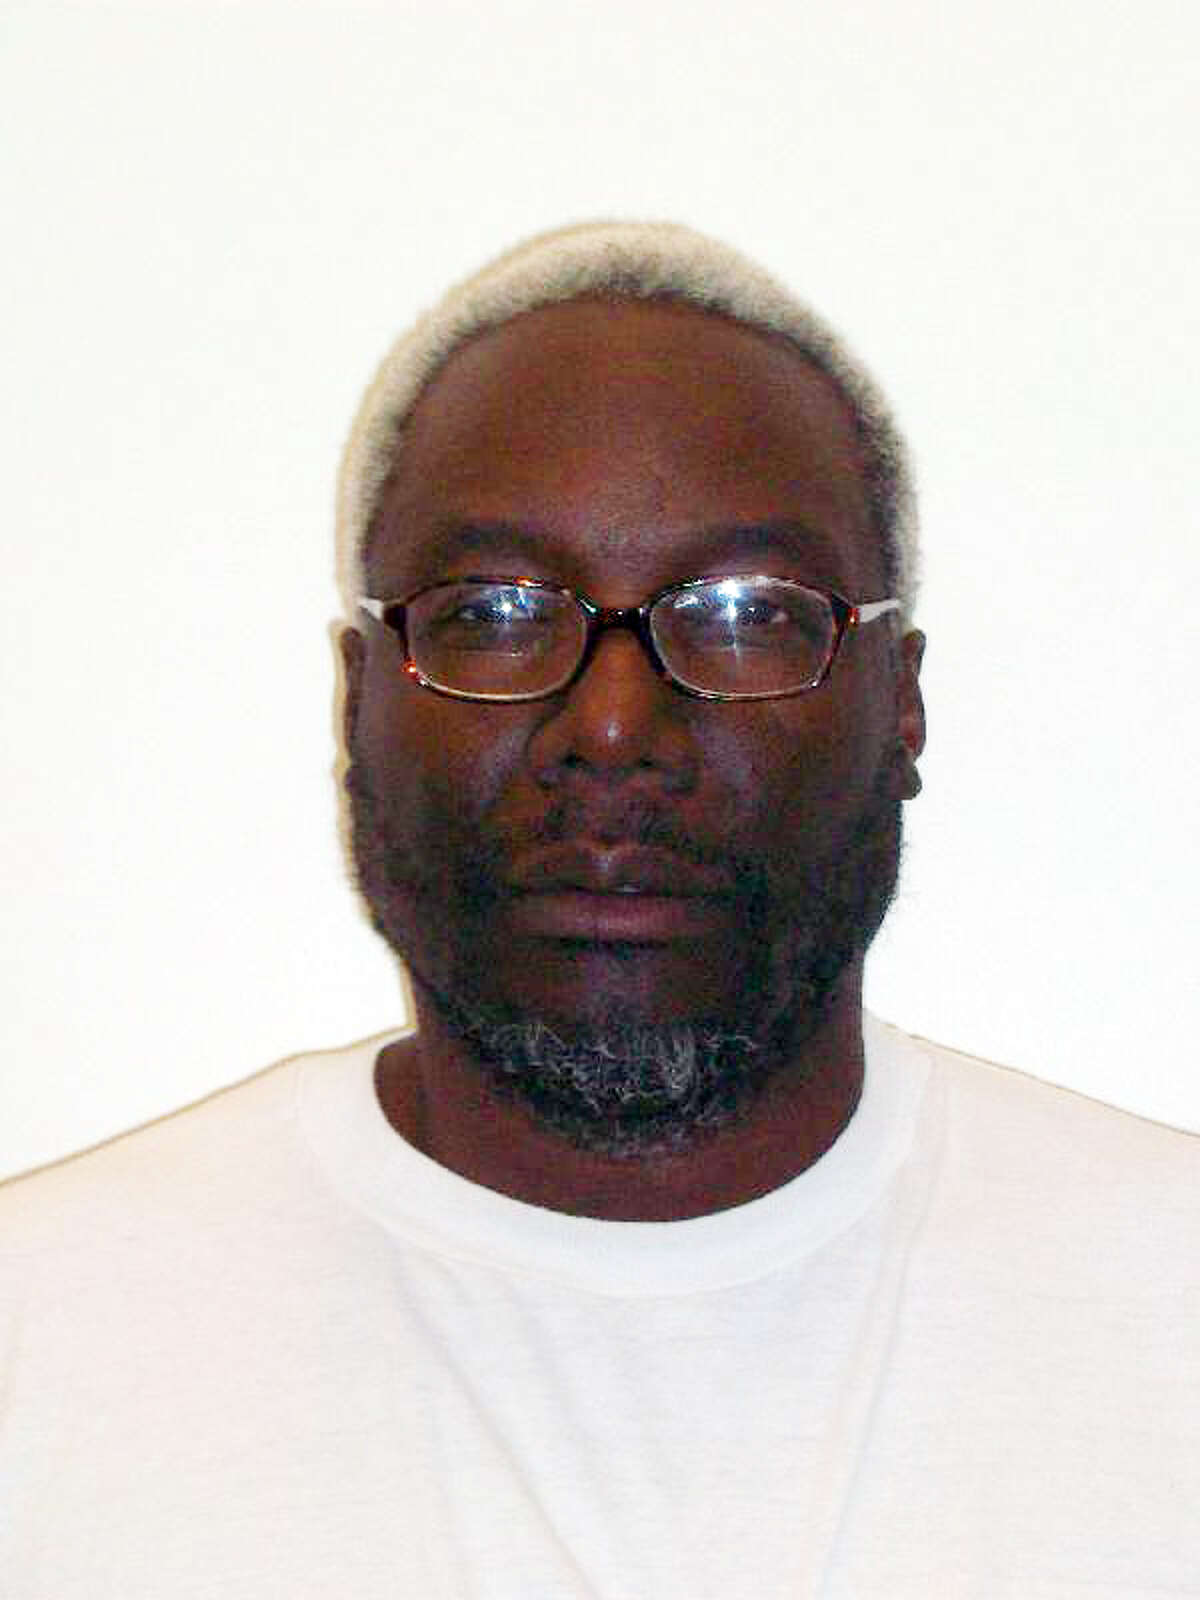 Robert Andre Frazier, pictured in a Department of Corrections photo.